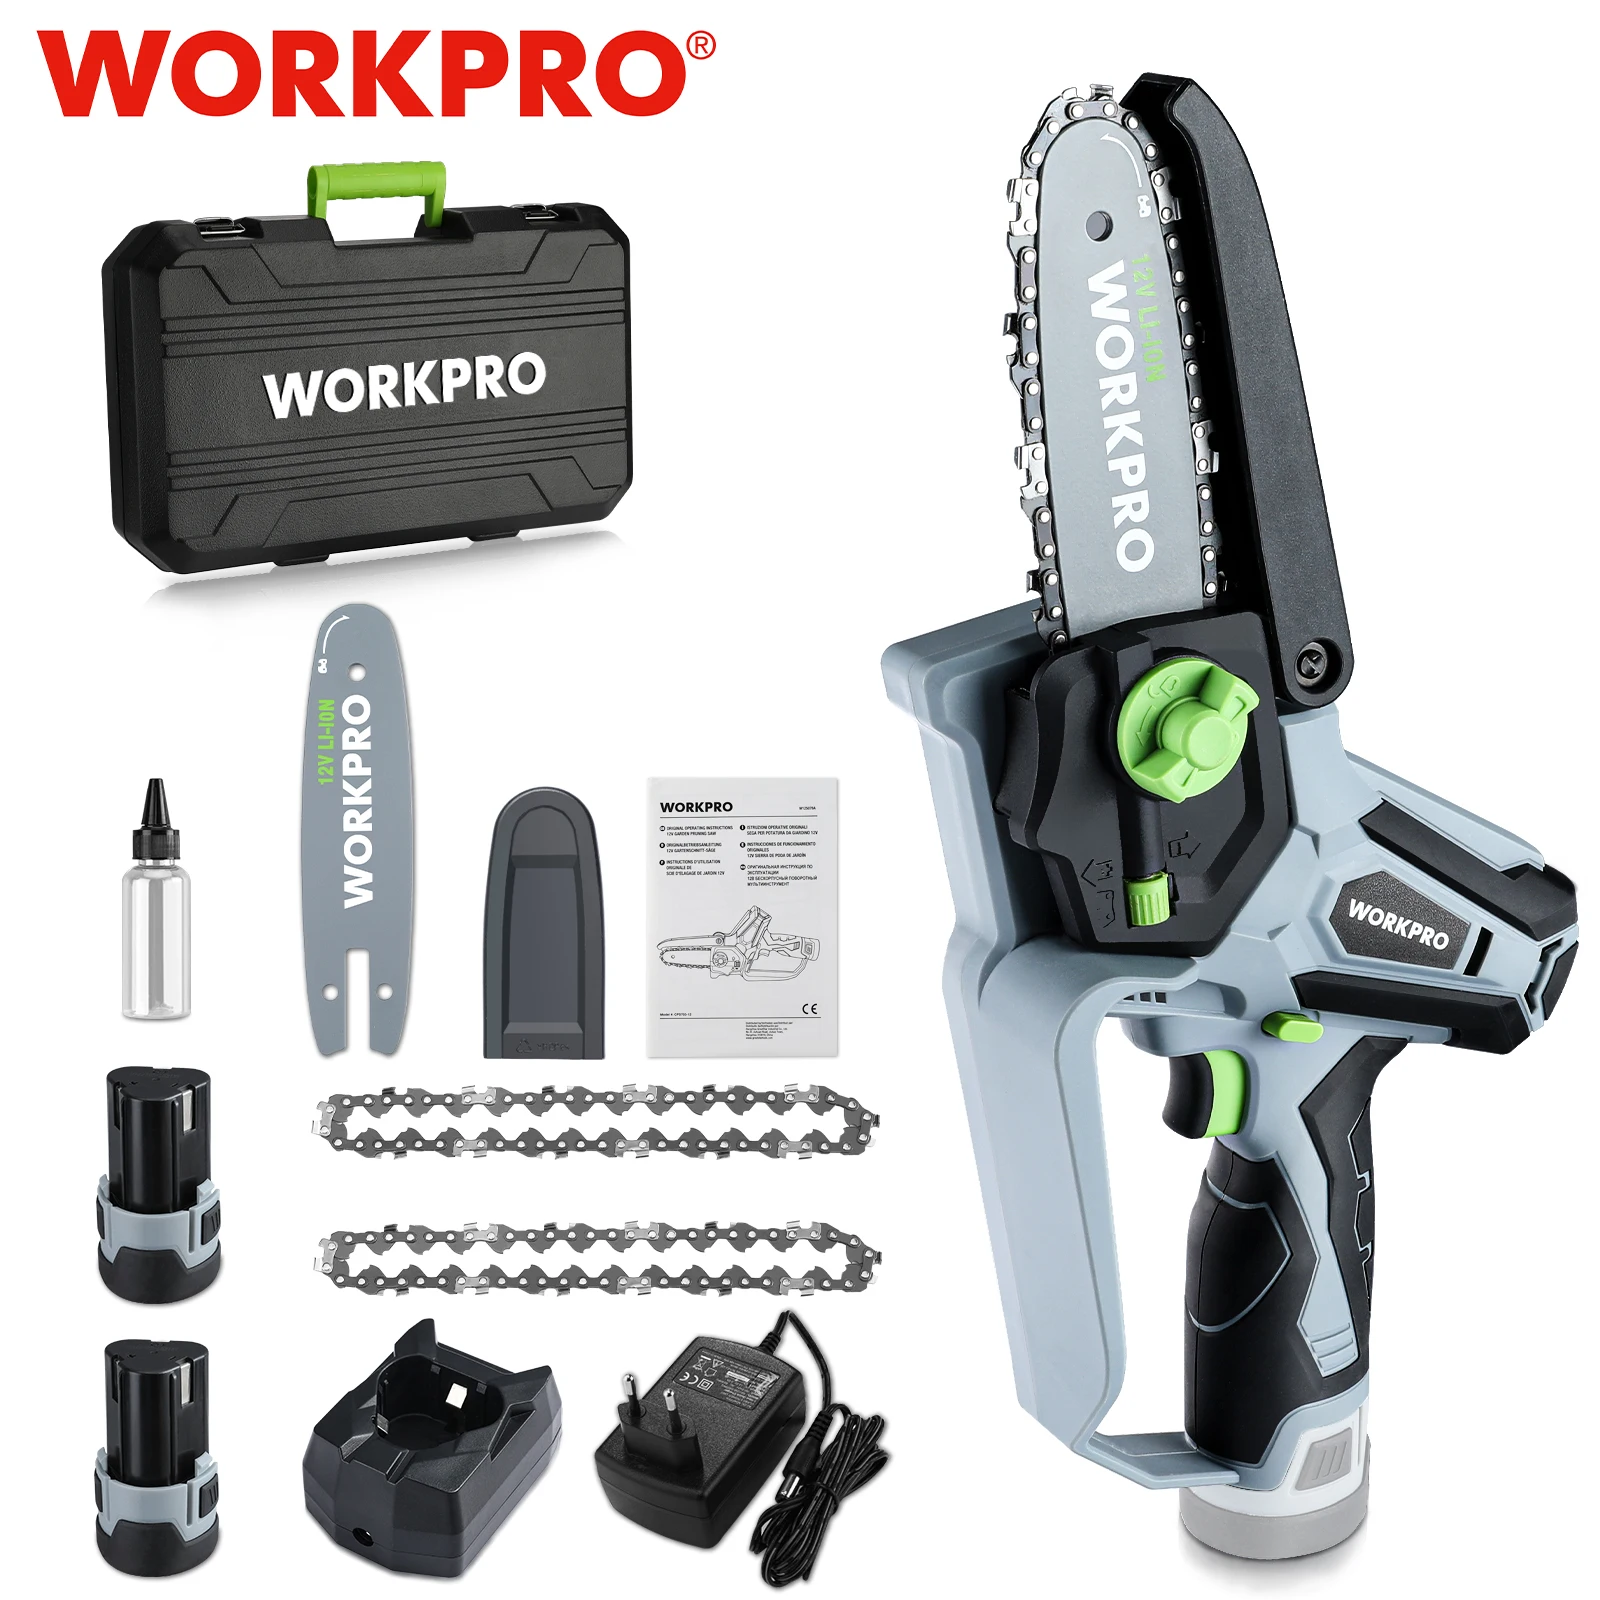 WORKPRO 12V Cordless Mini ChainSaw Rechargeable Electric Pruning Chainsaw for Gardening Tree Branch Pruning Wood Cutting workpro 20v cordless reciprocating saw 1 inch stroke length for wood